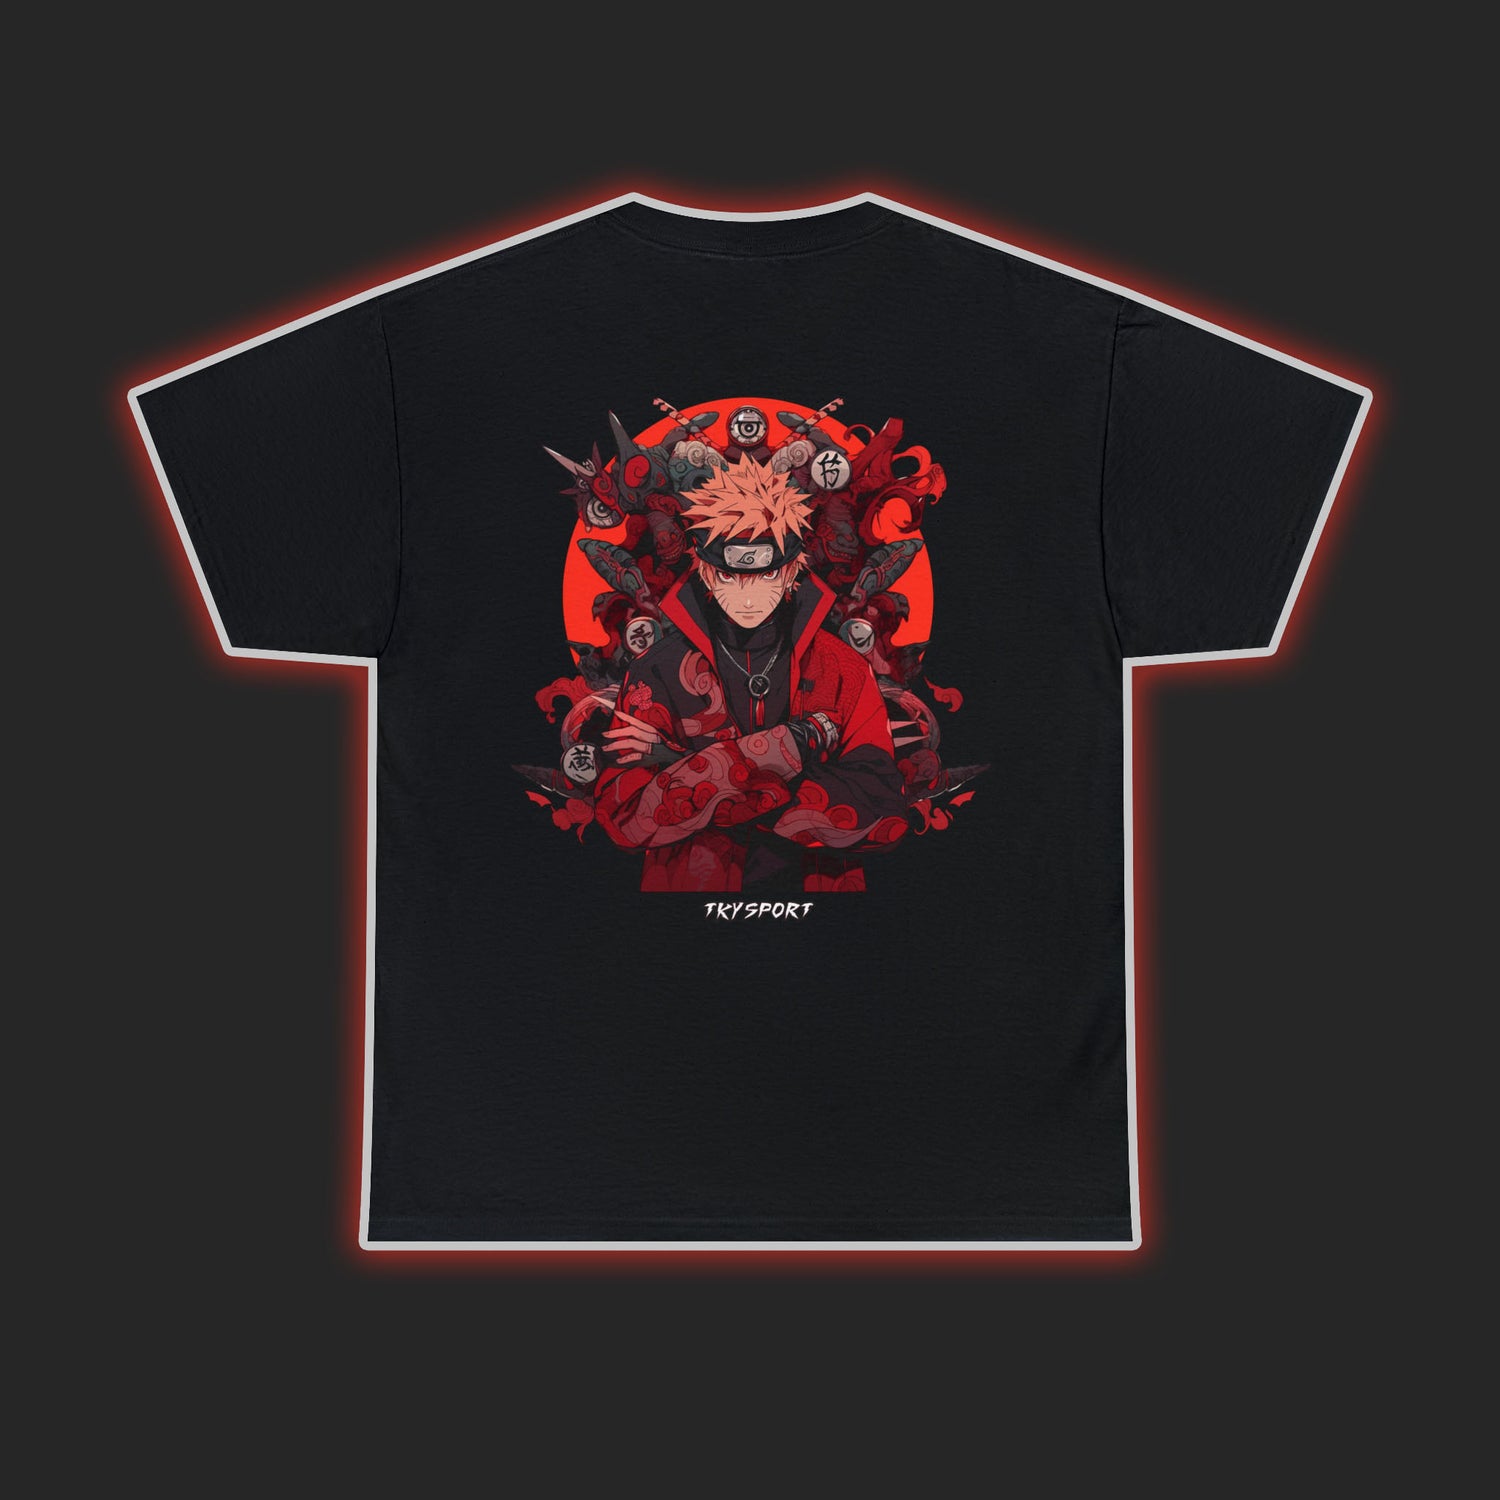 TKYSPORT Anime T-Shirt design of Naruto with his arms crossed, dark and red themed.